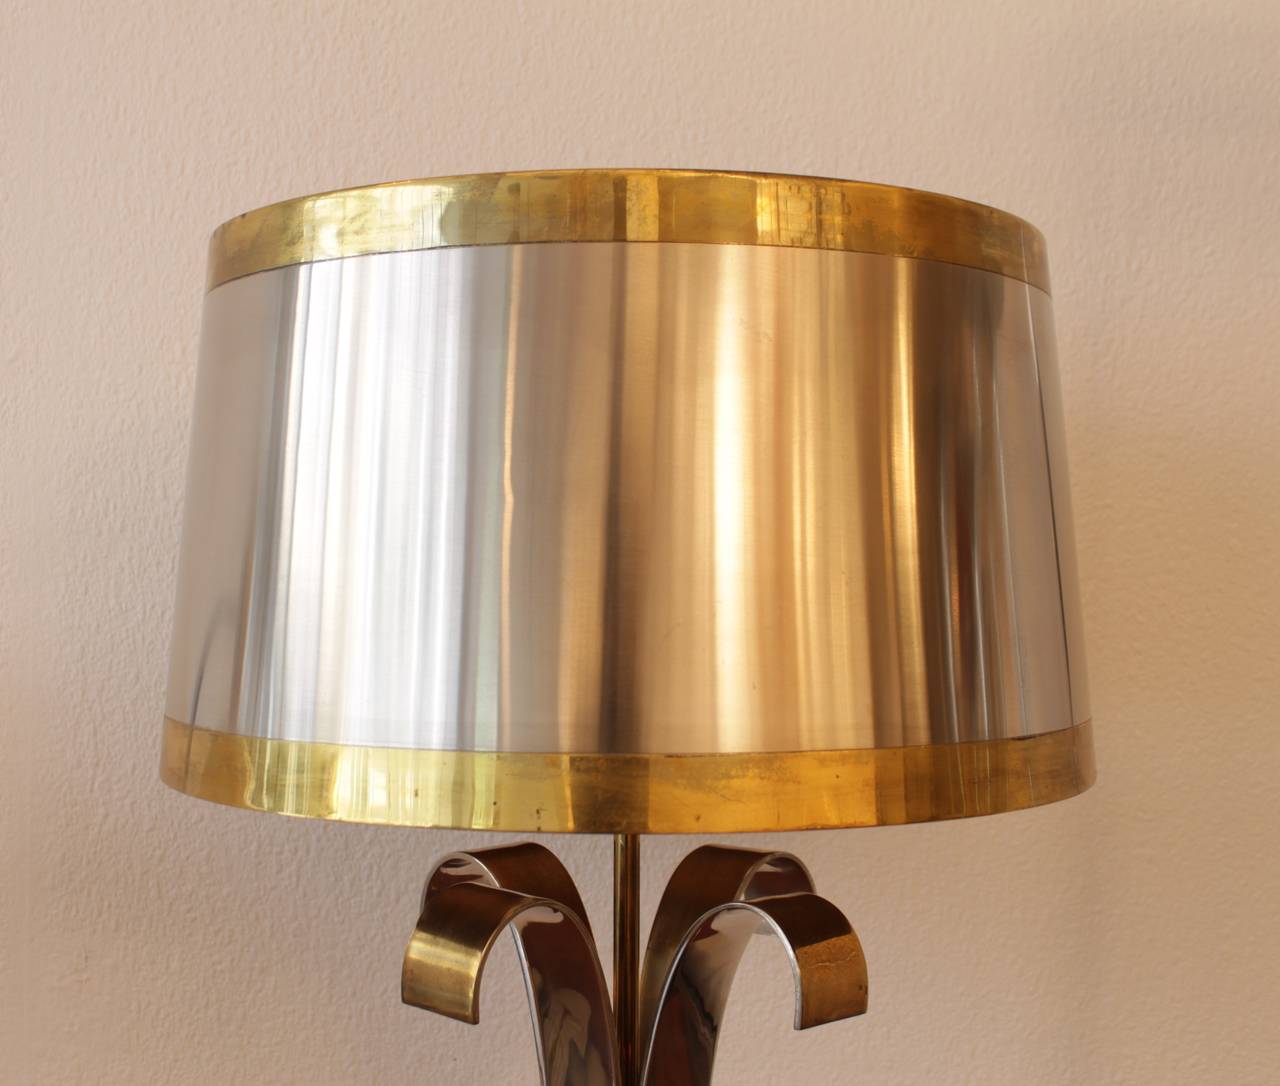 Signed Maison Charles Brass and Stainless Steel 